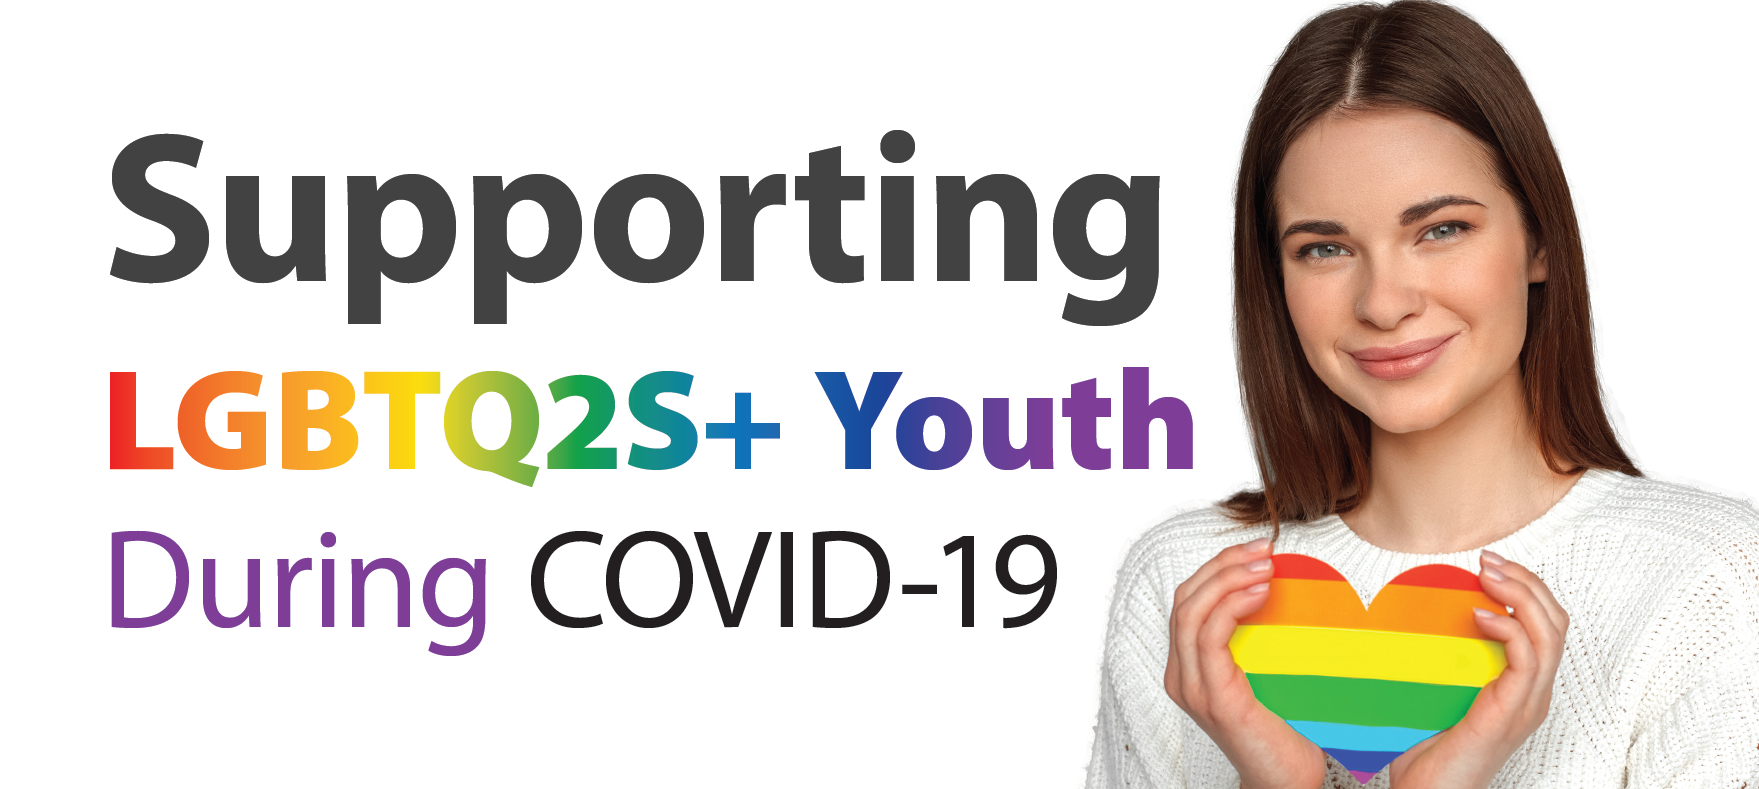 Supporting LGBTQ2S+ Youth During COVID-19